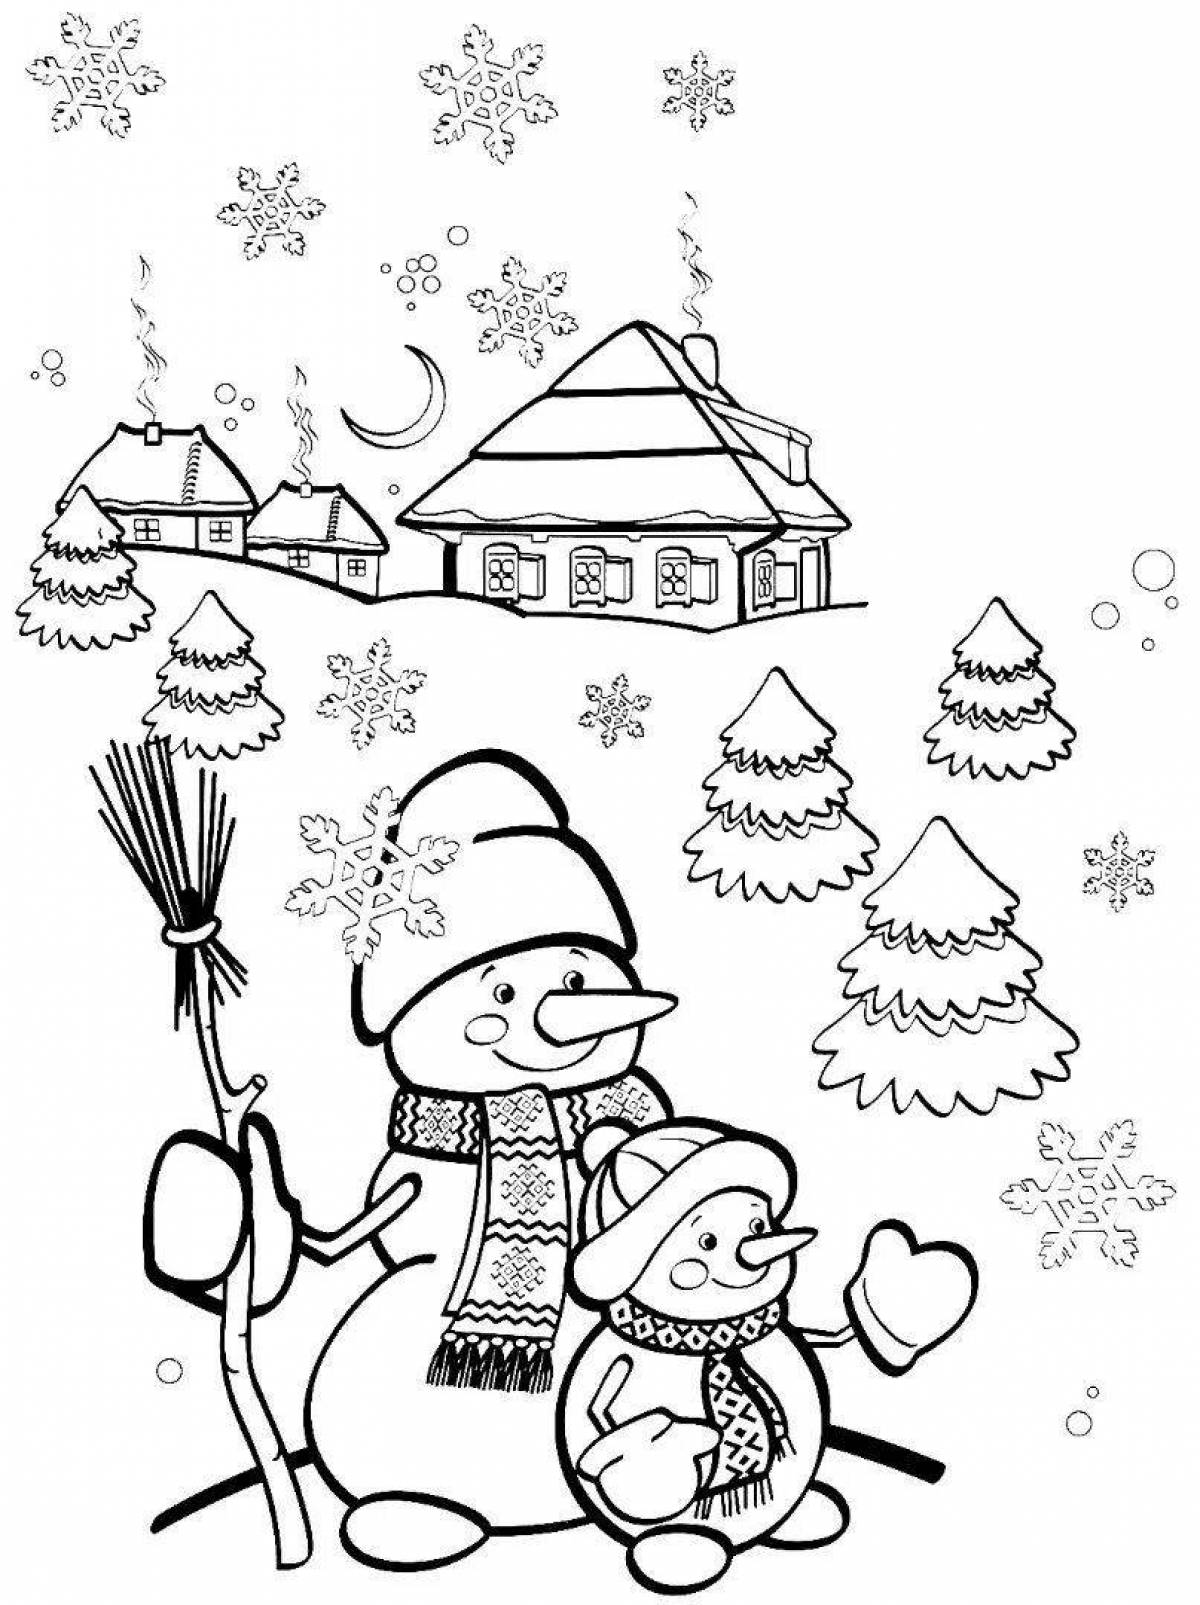 Radiant coloring page winter simple